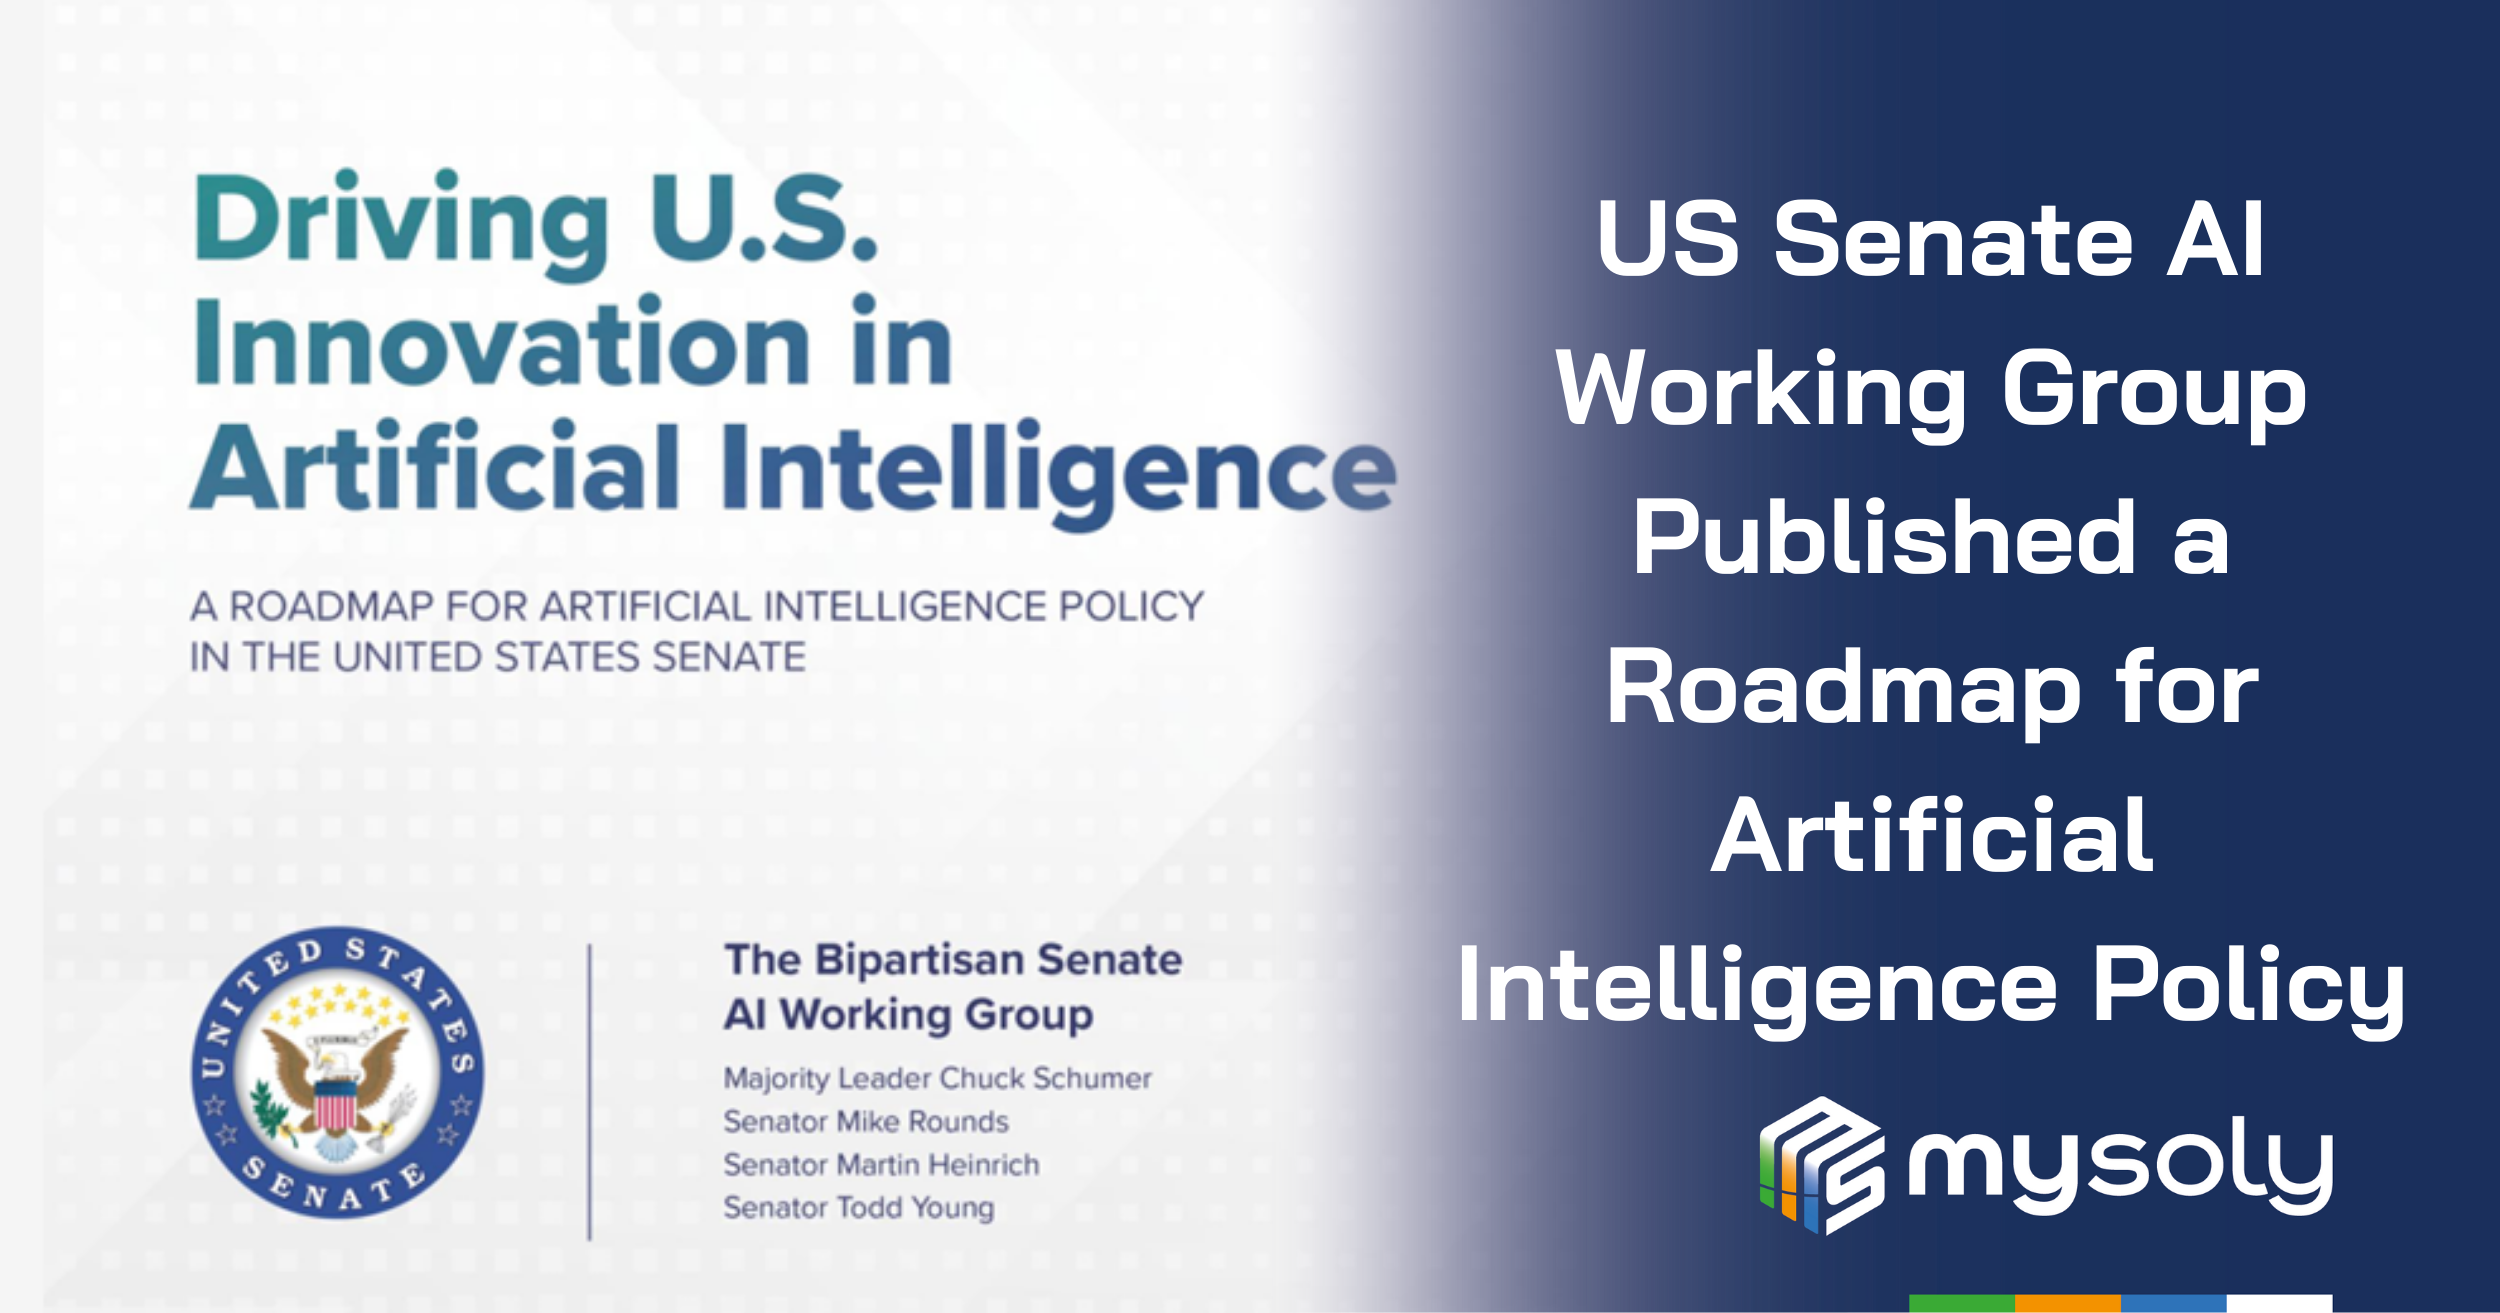 Roadmap for Artificial Intelligence Policy